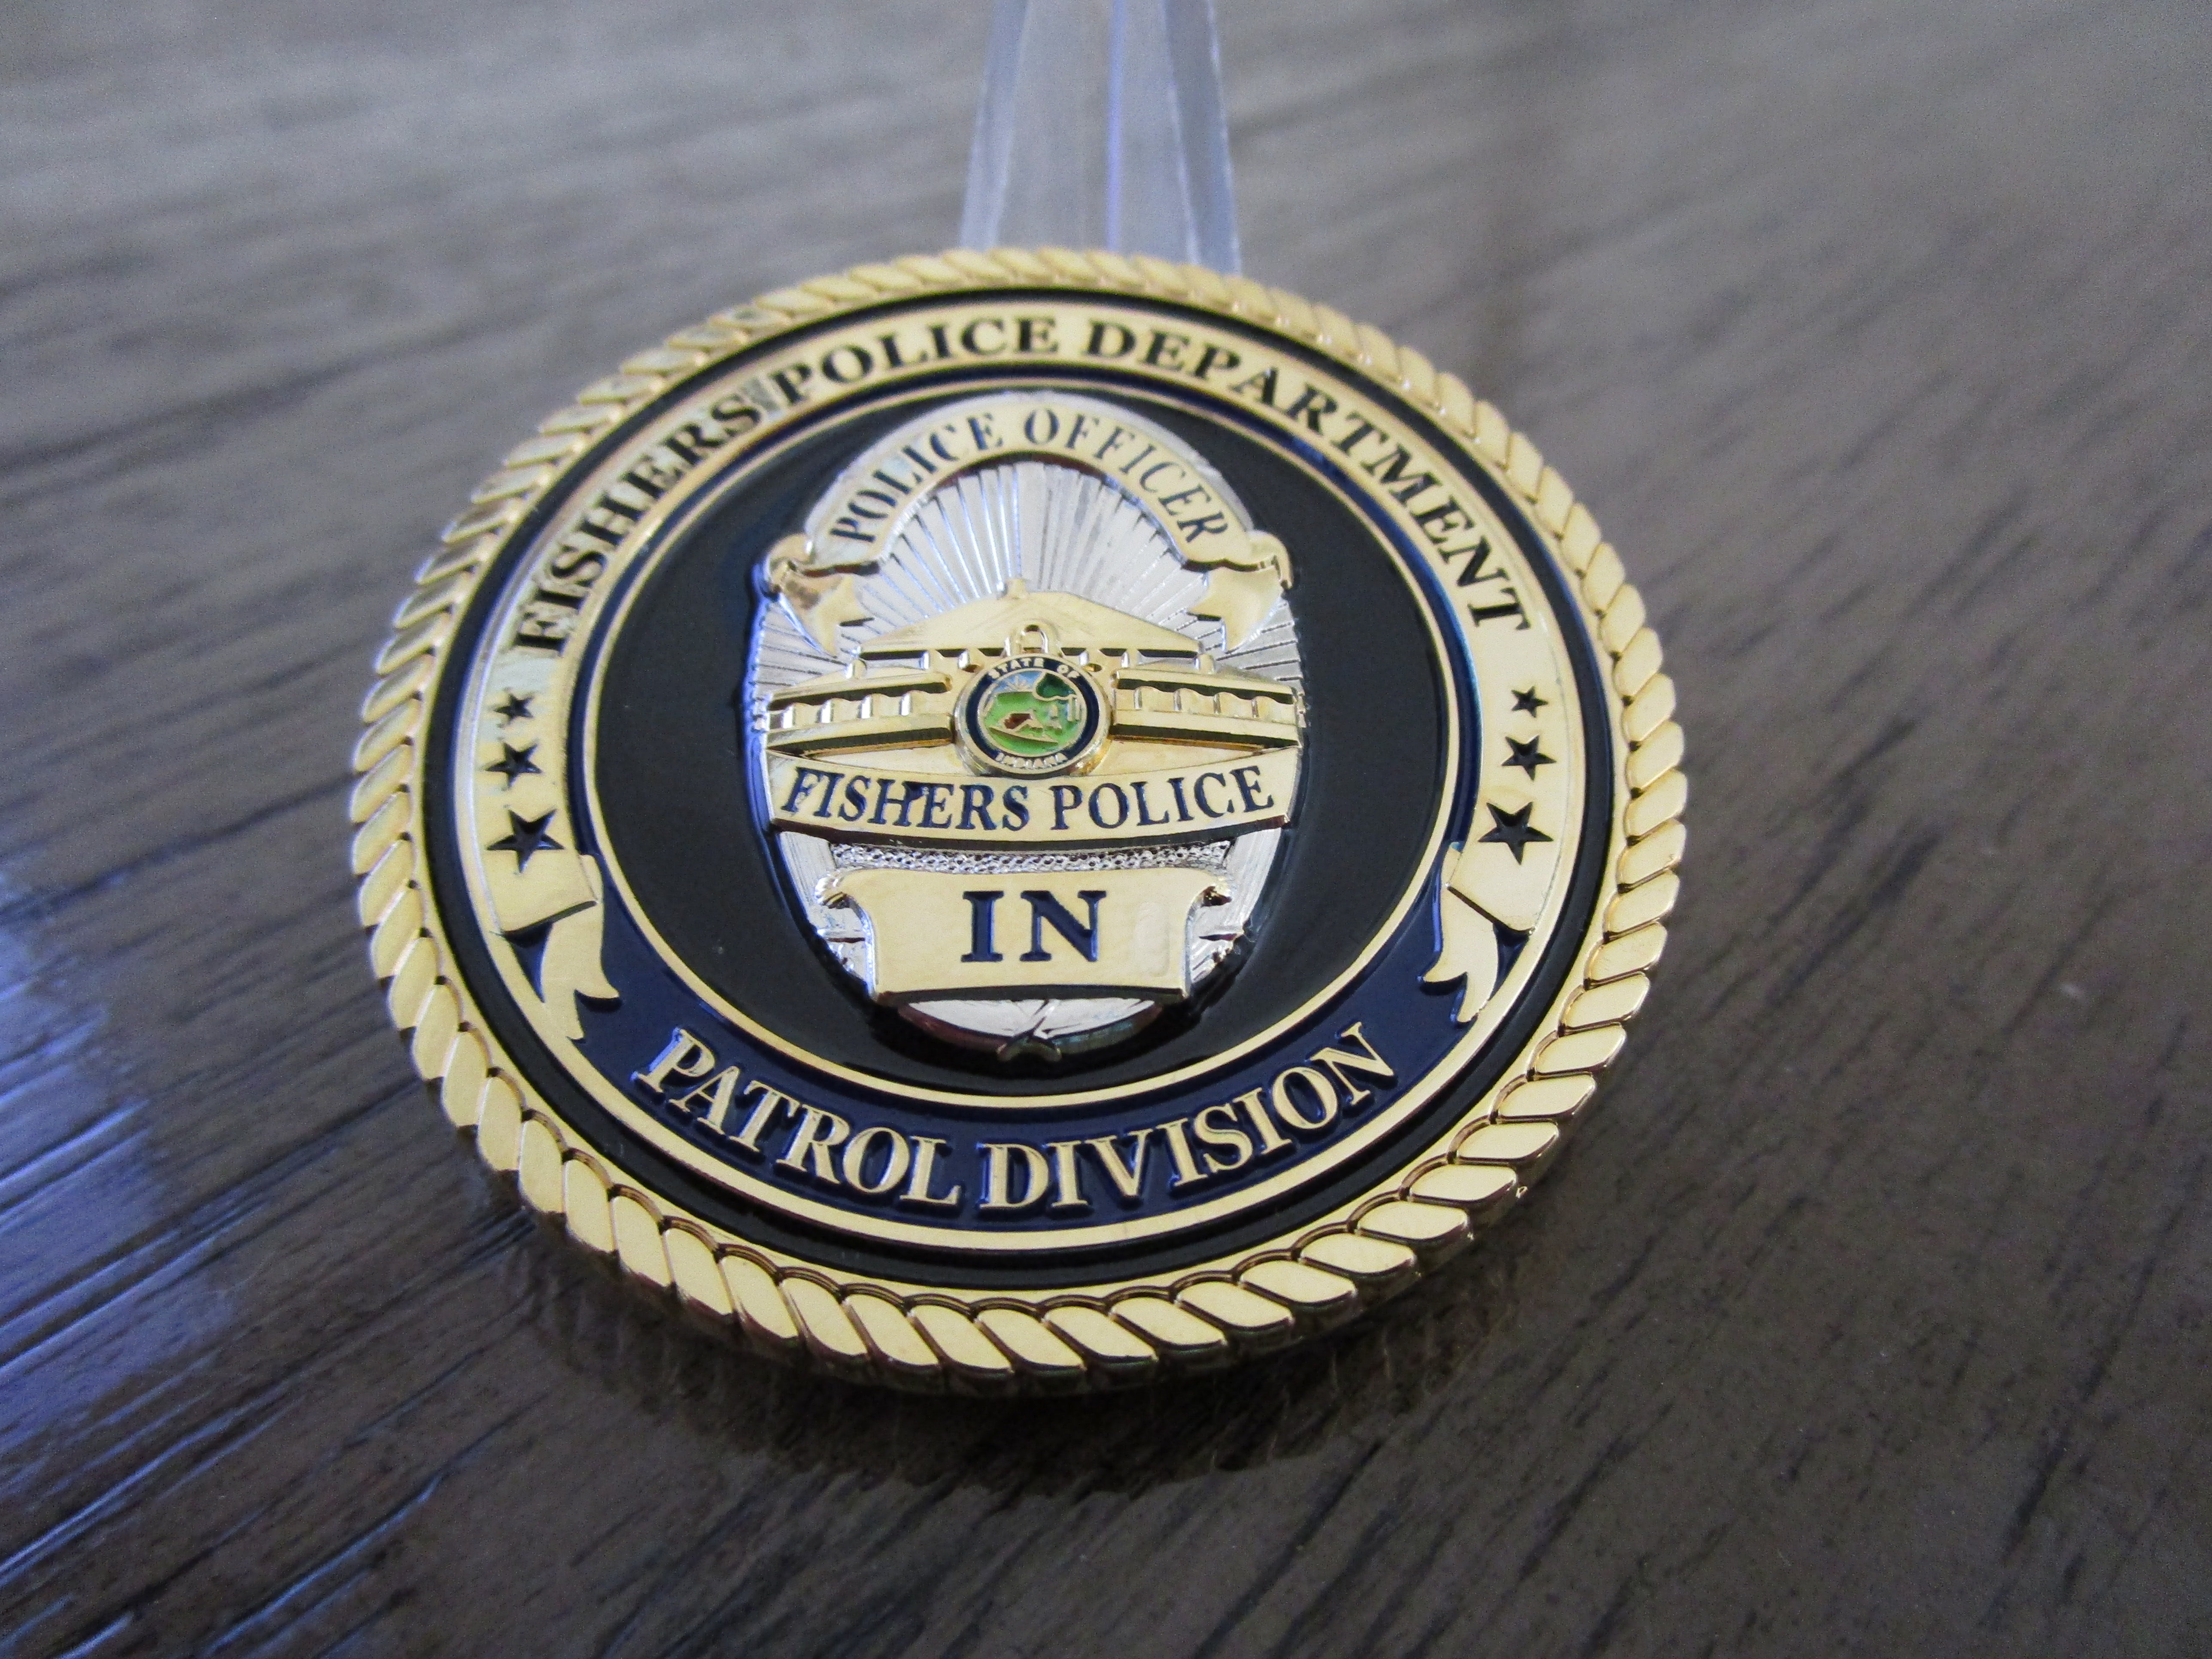 Fishers Police Department Patrol Division Indiana LEO Challenge Coin.